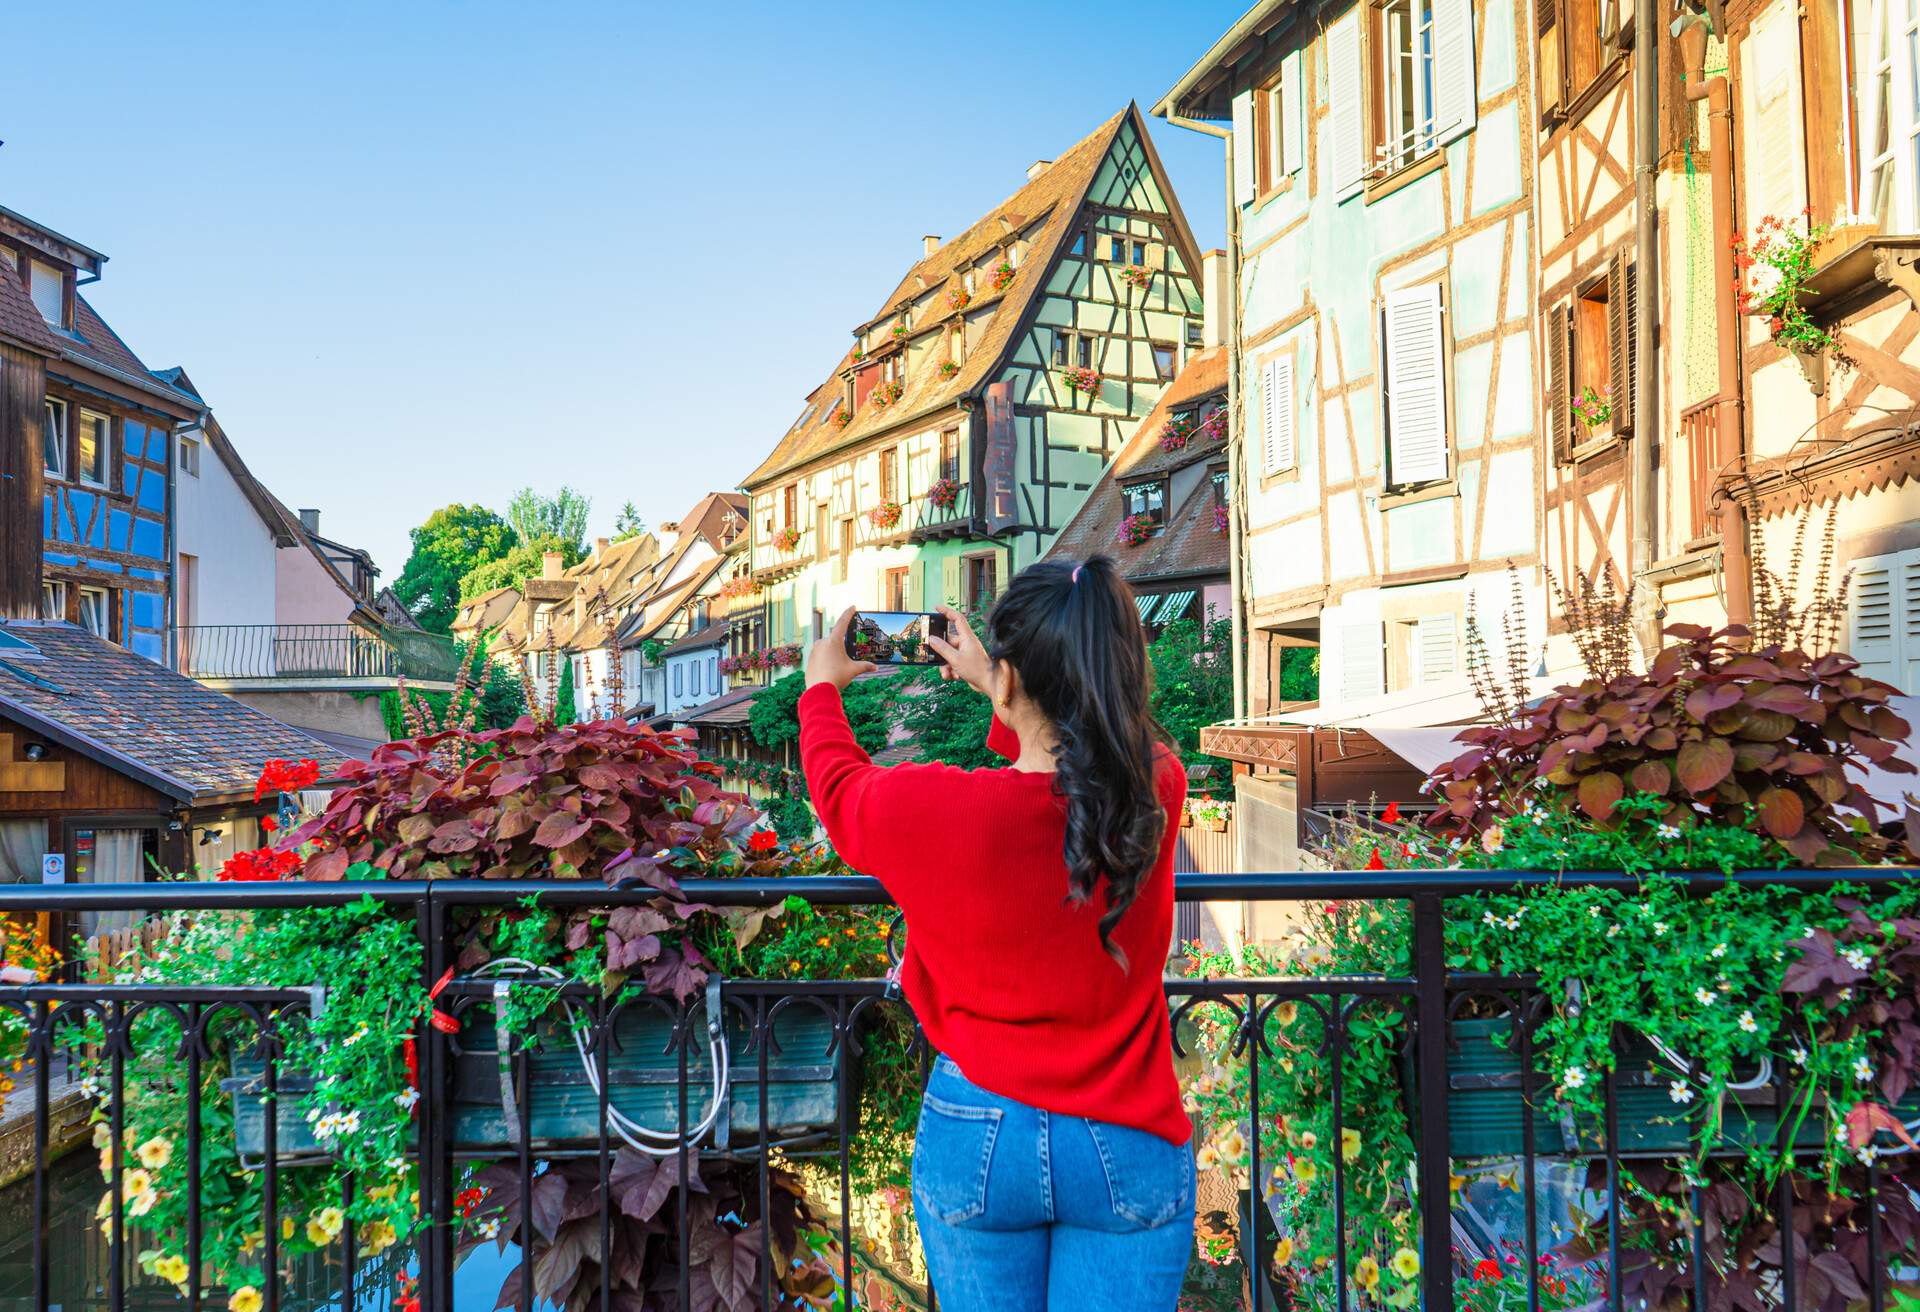 A female on a bridge takes a picture of the traditional half-timbered houses by the canal.